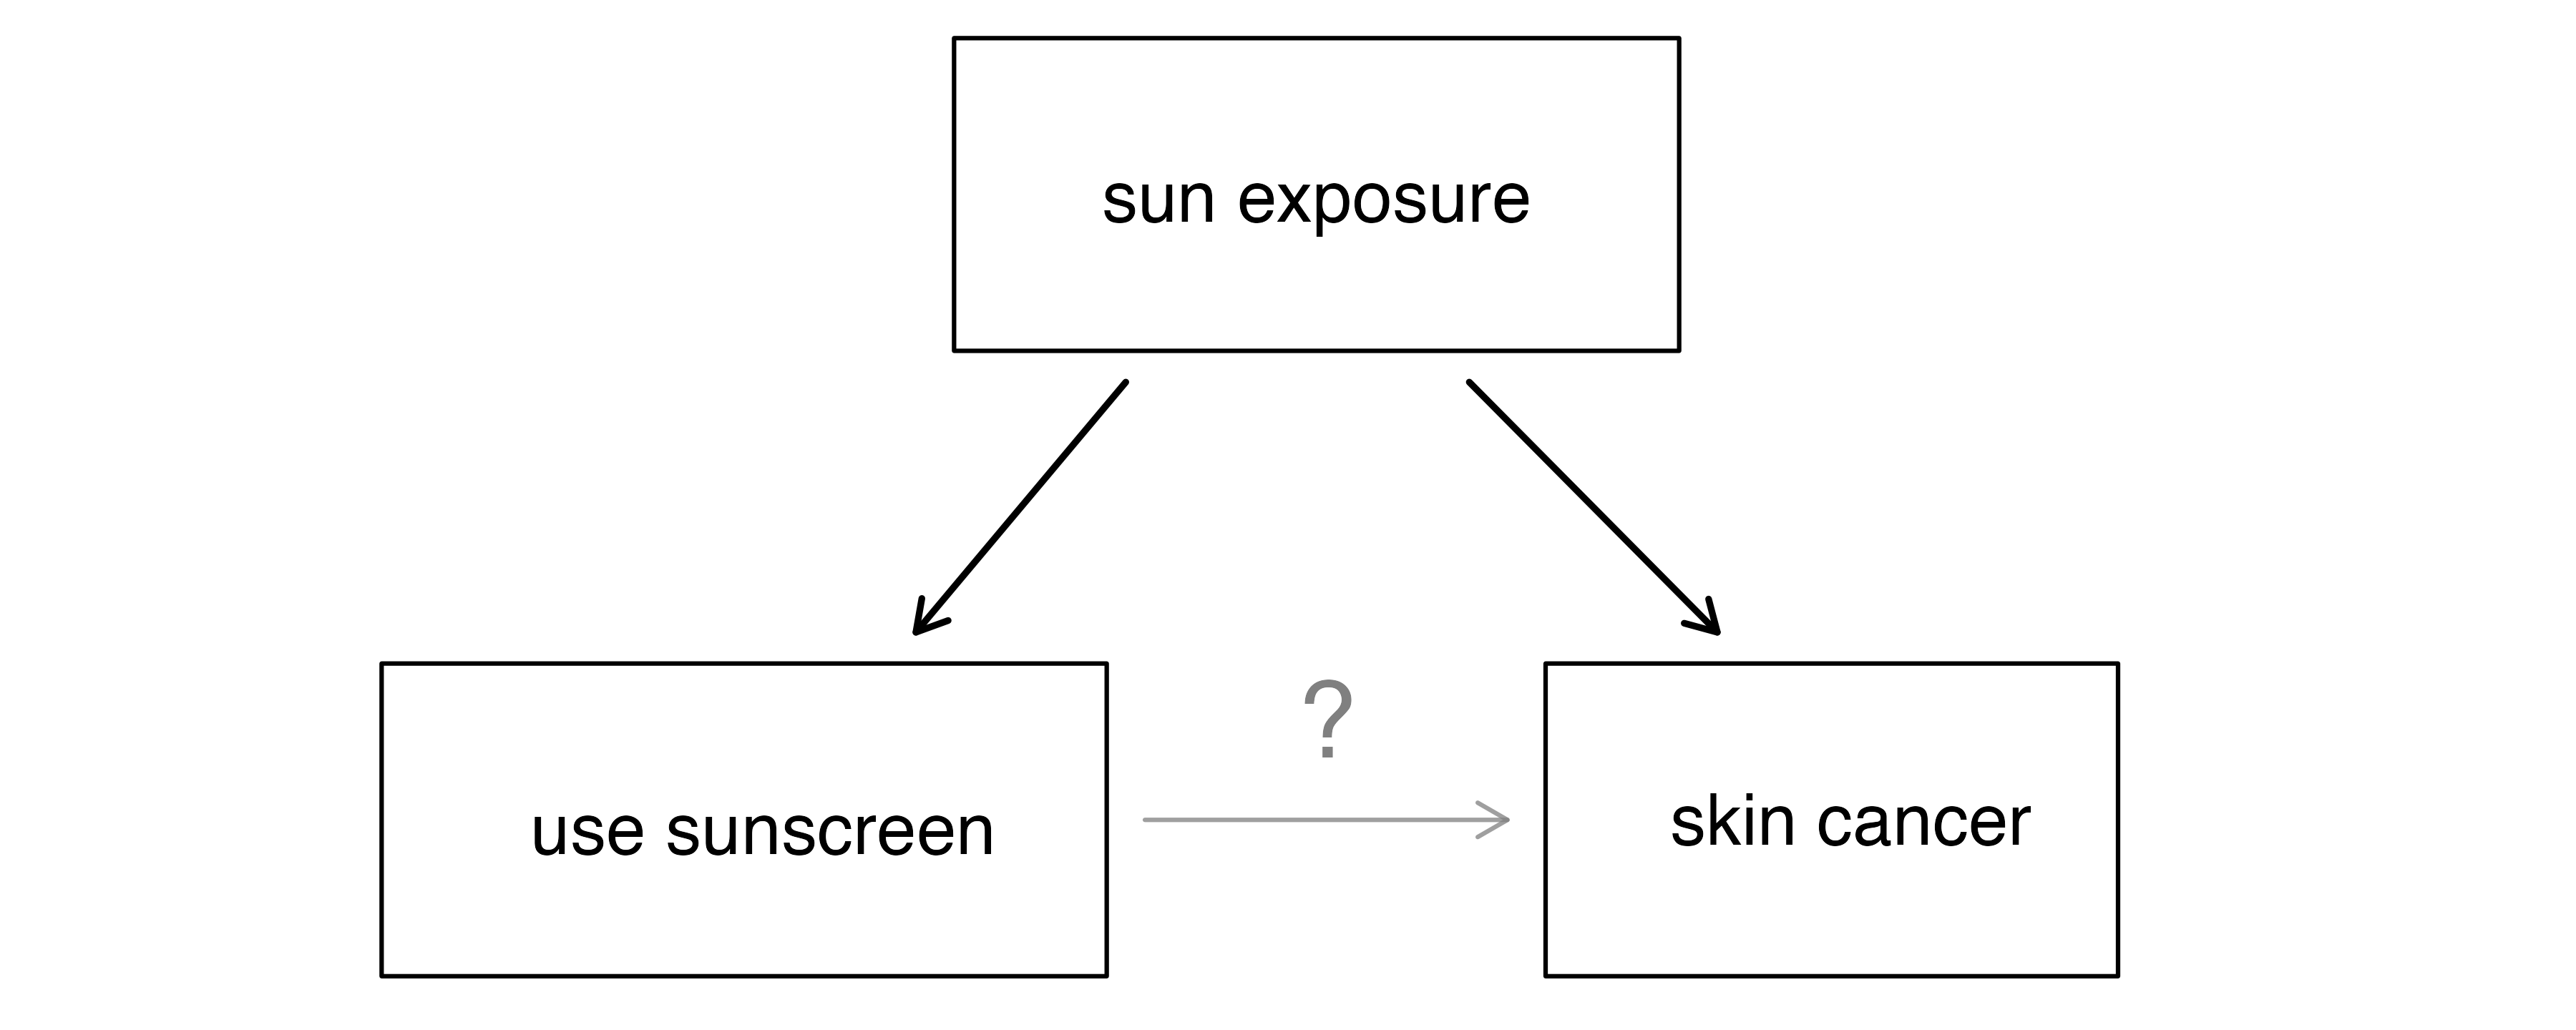 Three boxes are shown in a triangle arrangement representing: sun exposure, using sunscreen, and skin cancer.  A solid arrow connects sun exposure as a causal mechanism to using sunscreen; a solid arrow also connects sun exposure as a causal mechanism to skin cancer.  A questioning arrow indicates that the causal effect of using sunscreen on skin cancer is unknown.